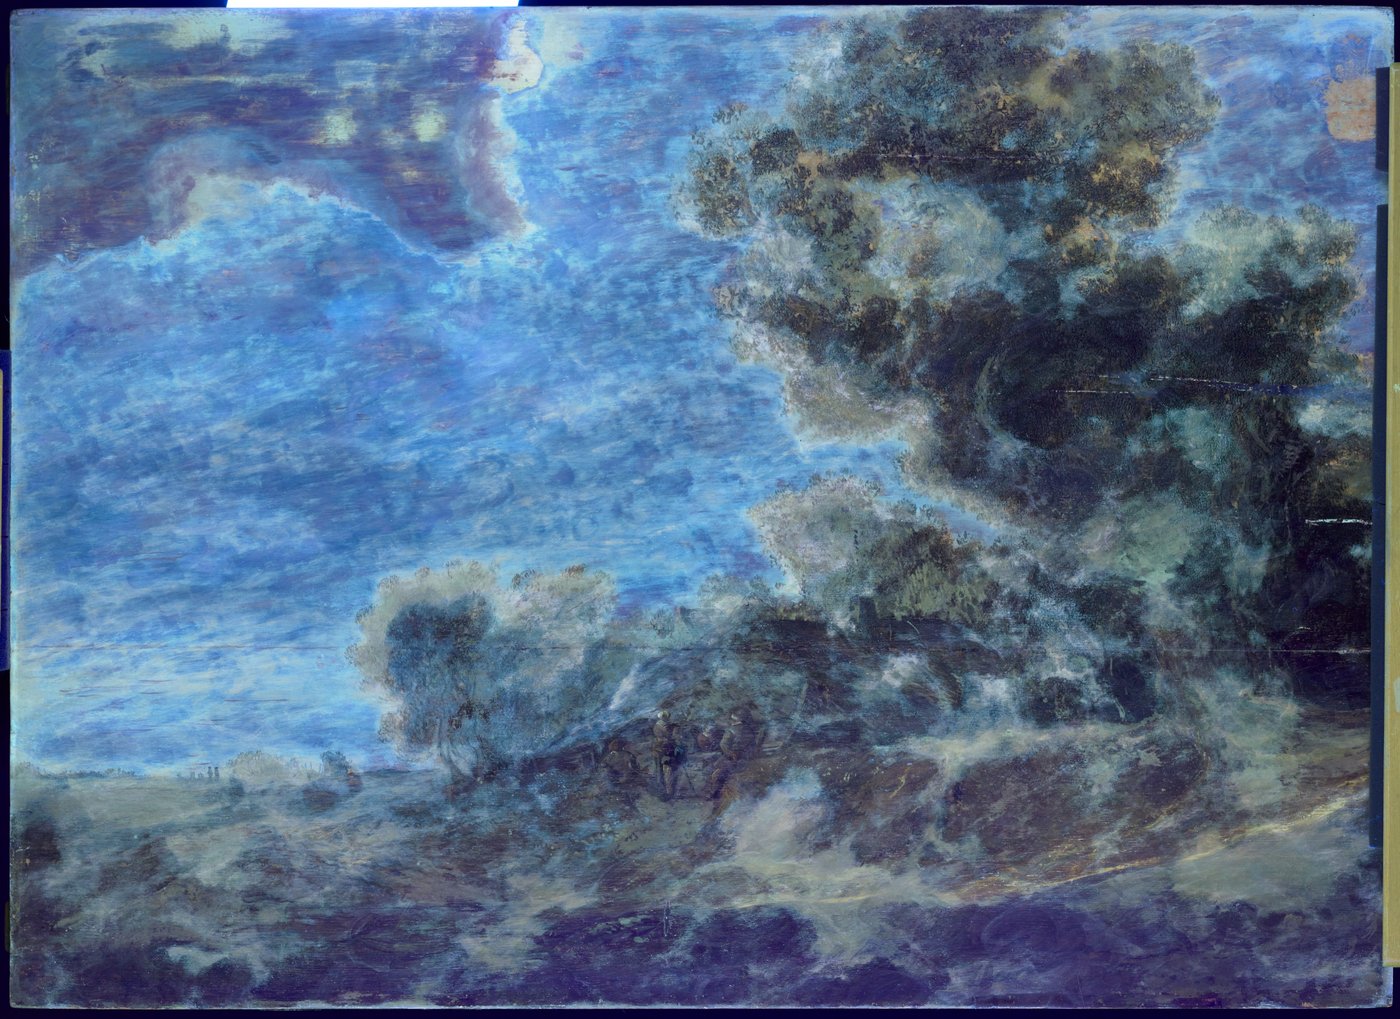 A painting with a landscape and sky that fluoresces light blue in large parts.